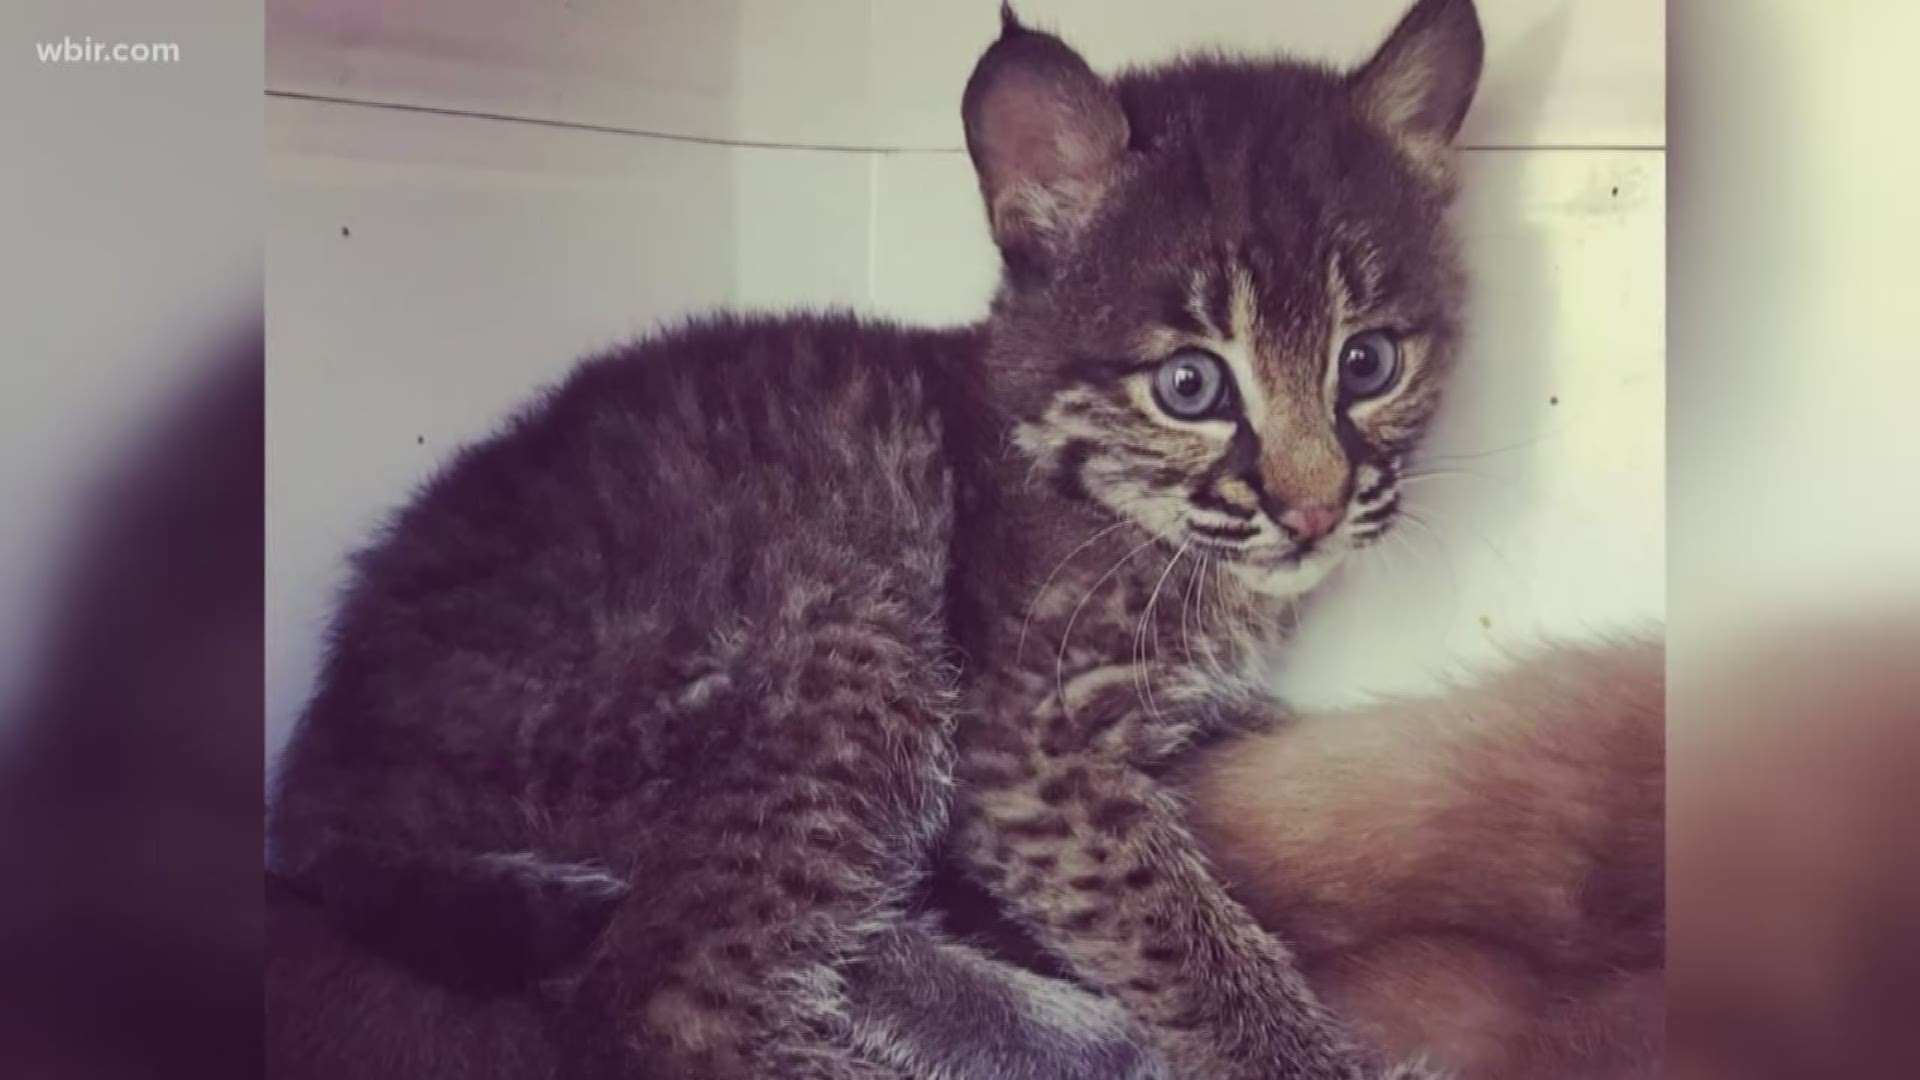 A wild animal rescue has a new addition thanks to an honest mistake by an animal lover.